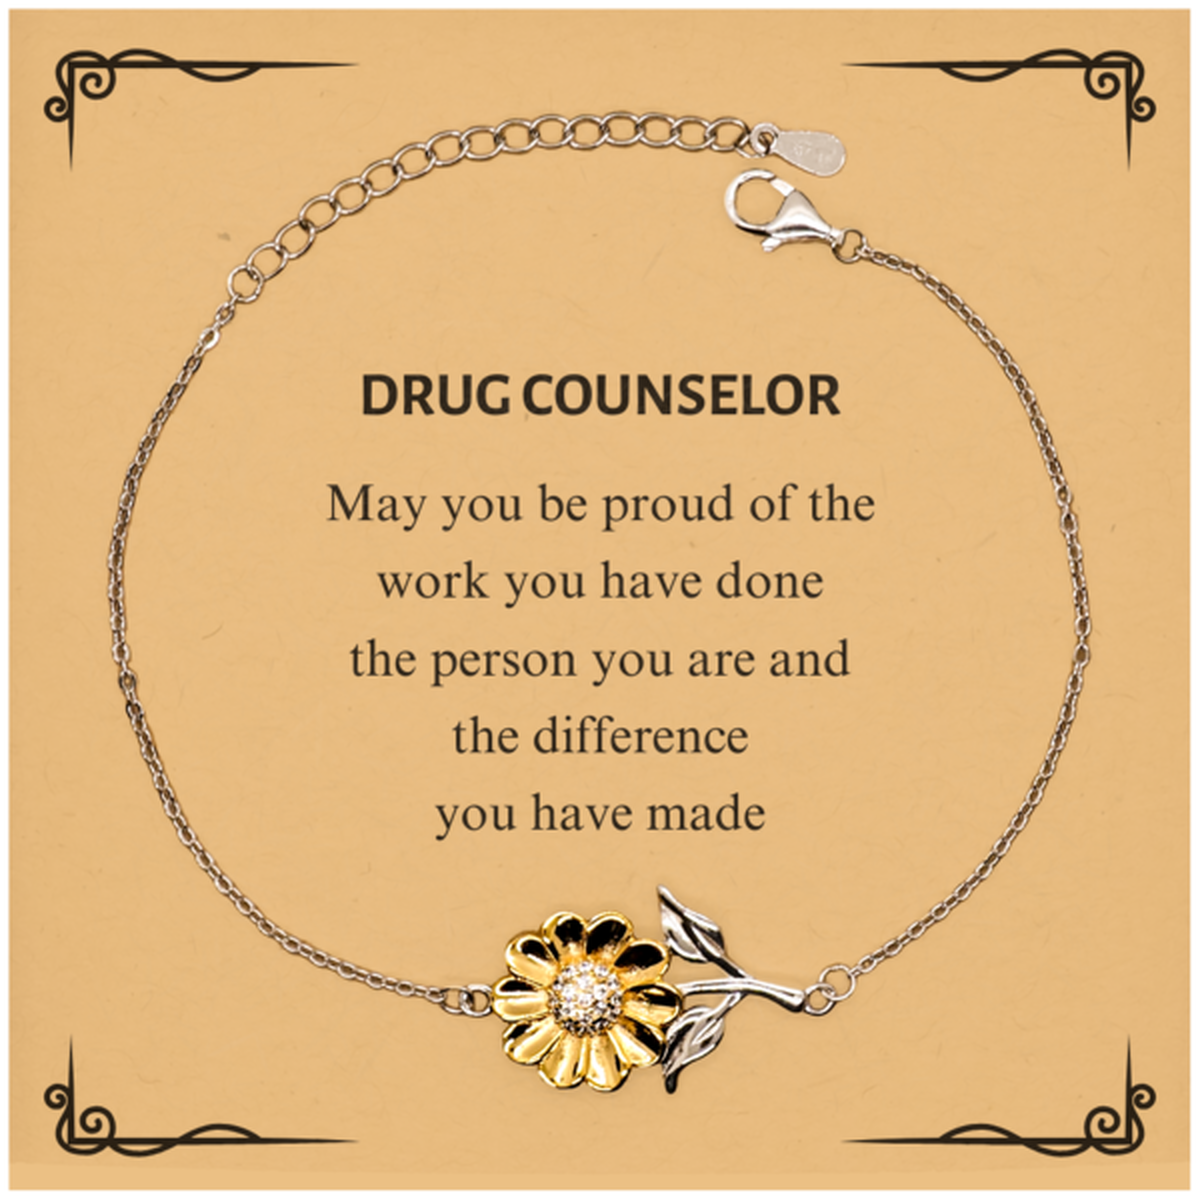 Drug Counselor May you be proud of the work you have done, Retirement Drug Counselor Sunflower Bracelet for Colleague Appreciation Gifts Amazing for Drug Counselor